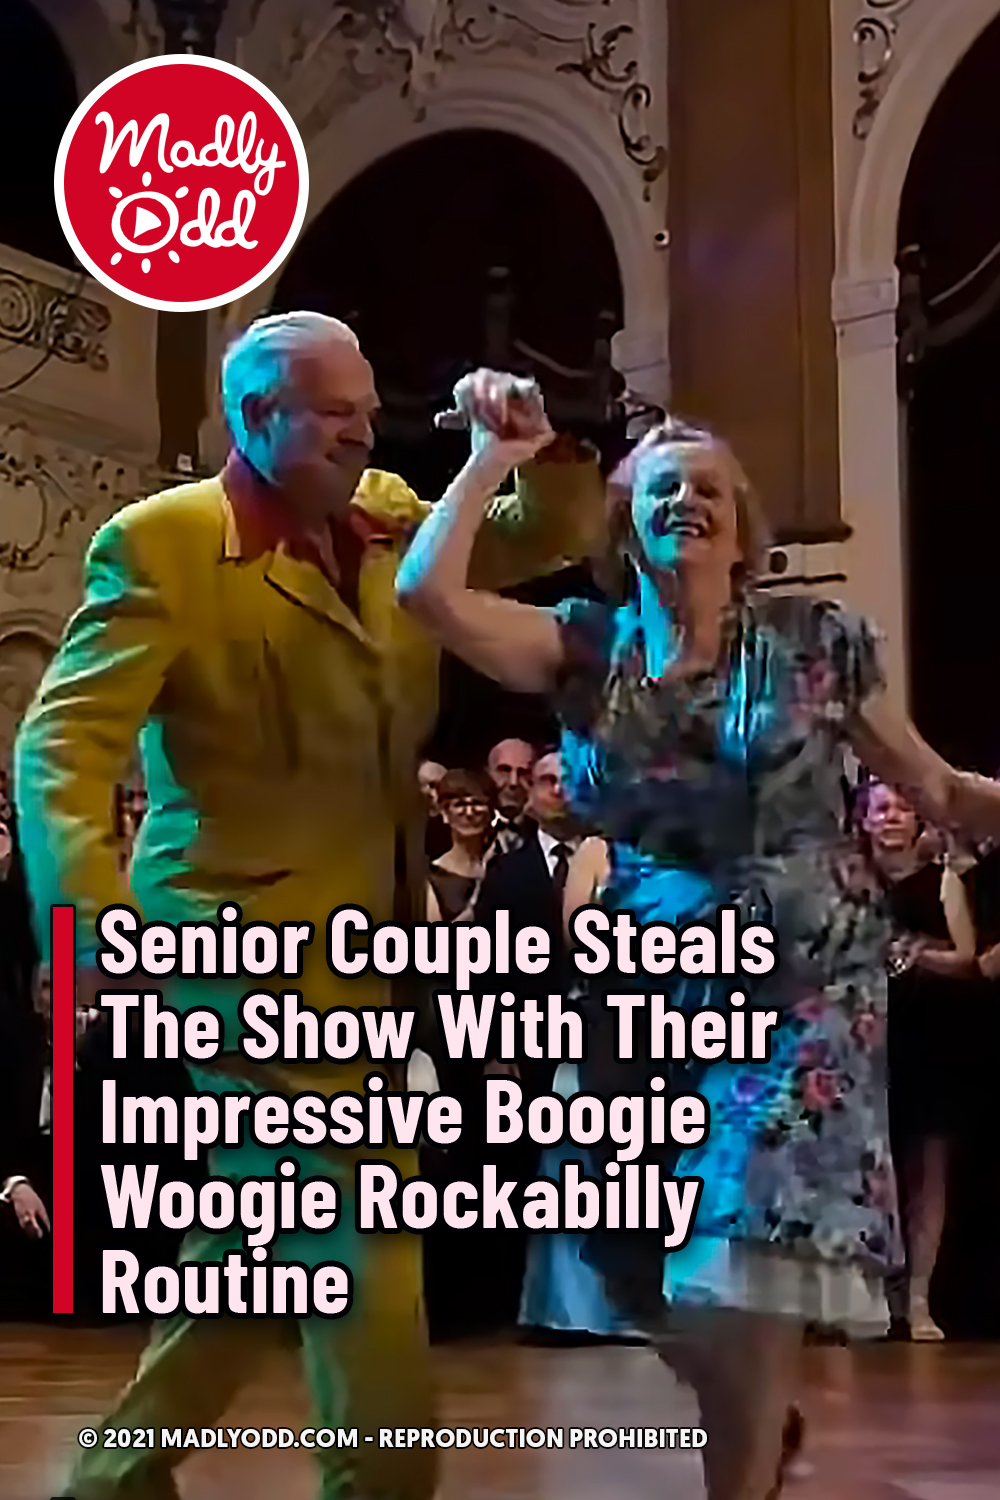 Senior Couple Steals The Show With Their Impressive Boogie Woogie Rockabilly Routine